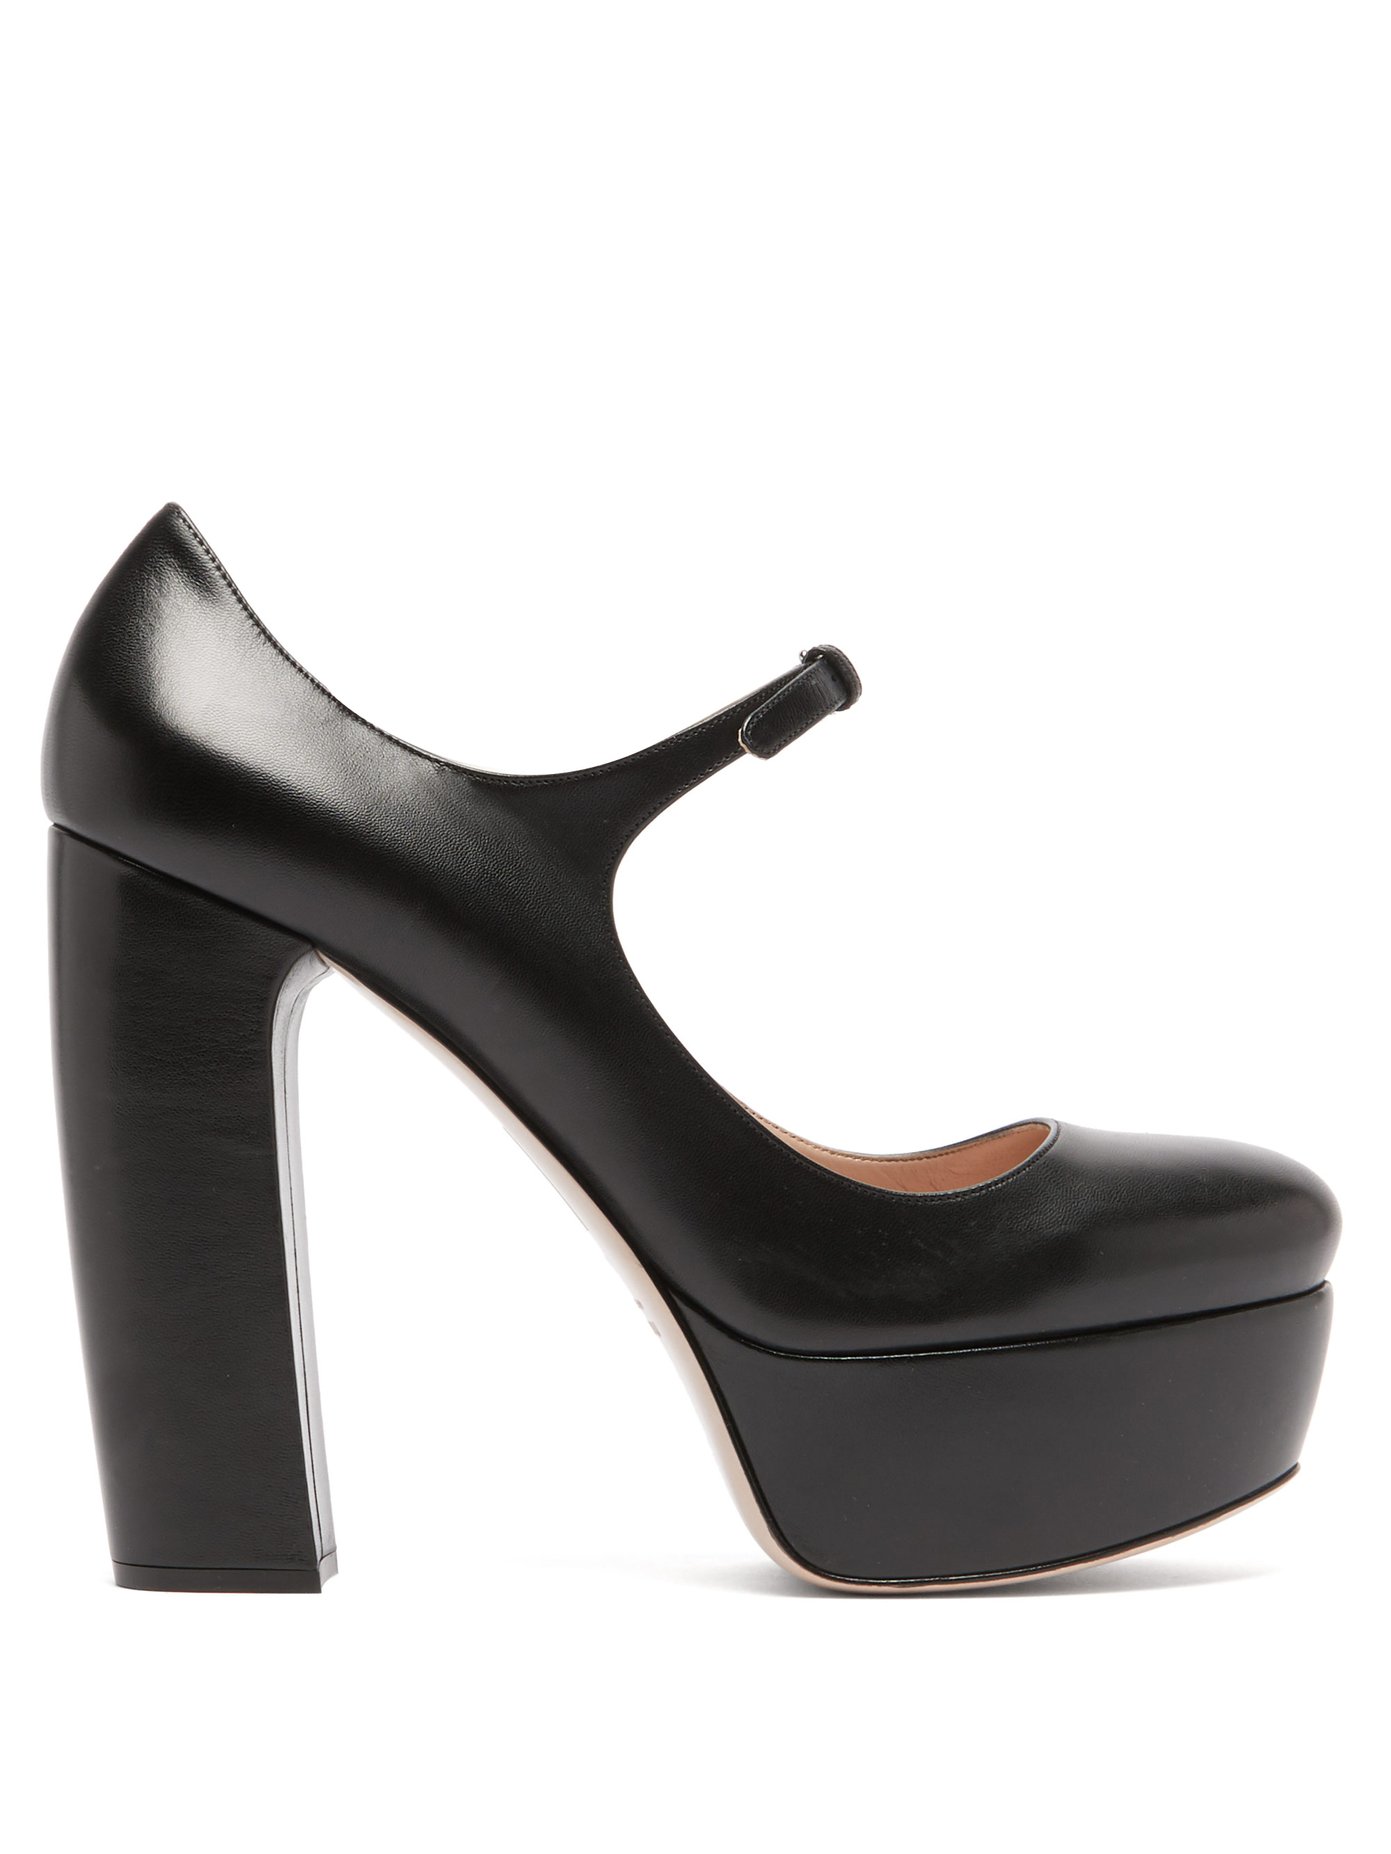 black leather mary jane pumps